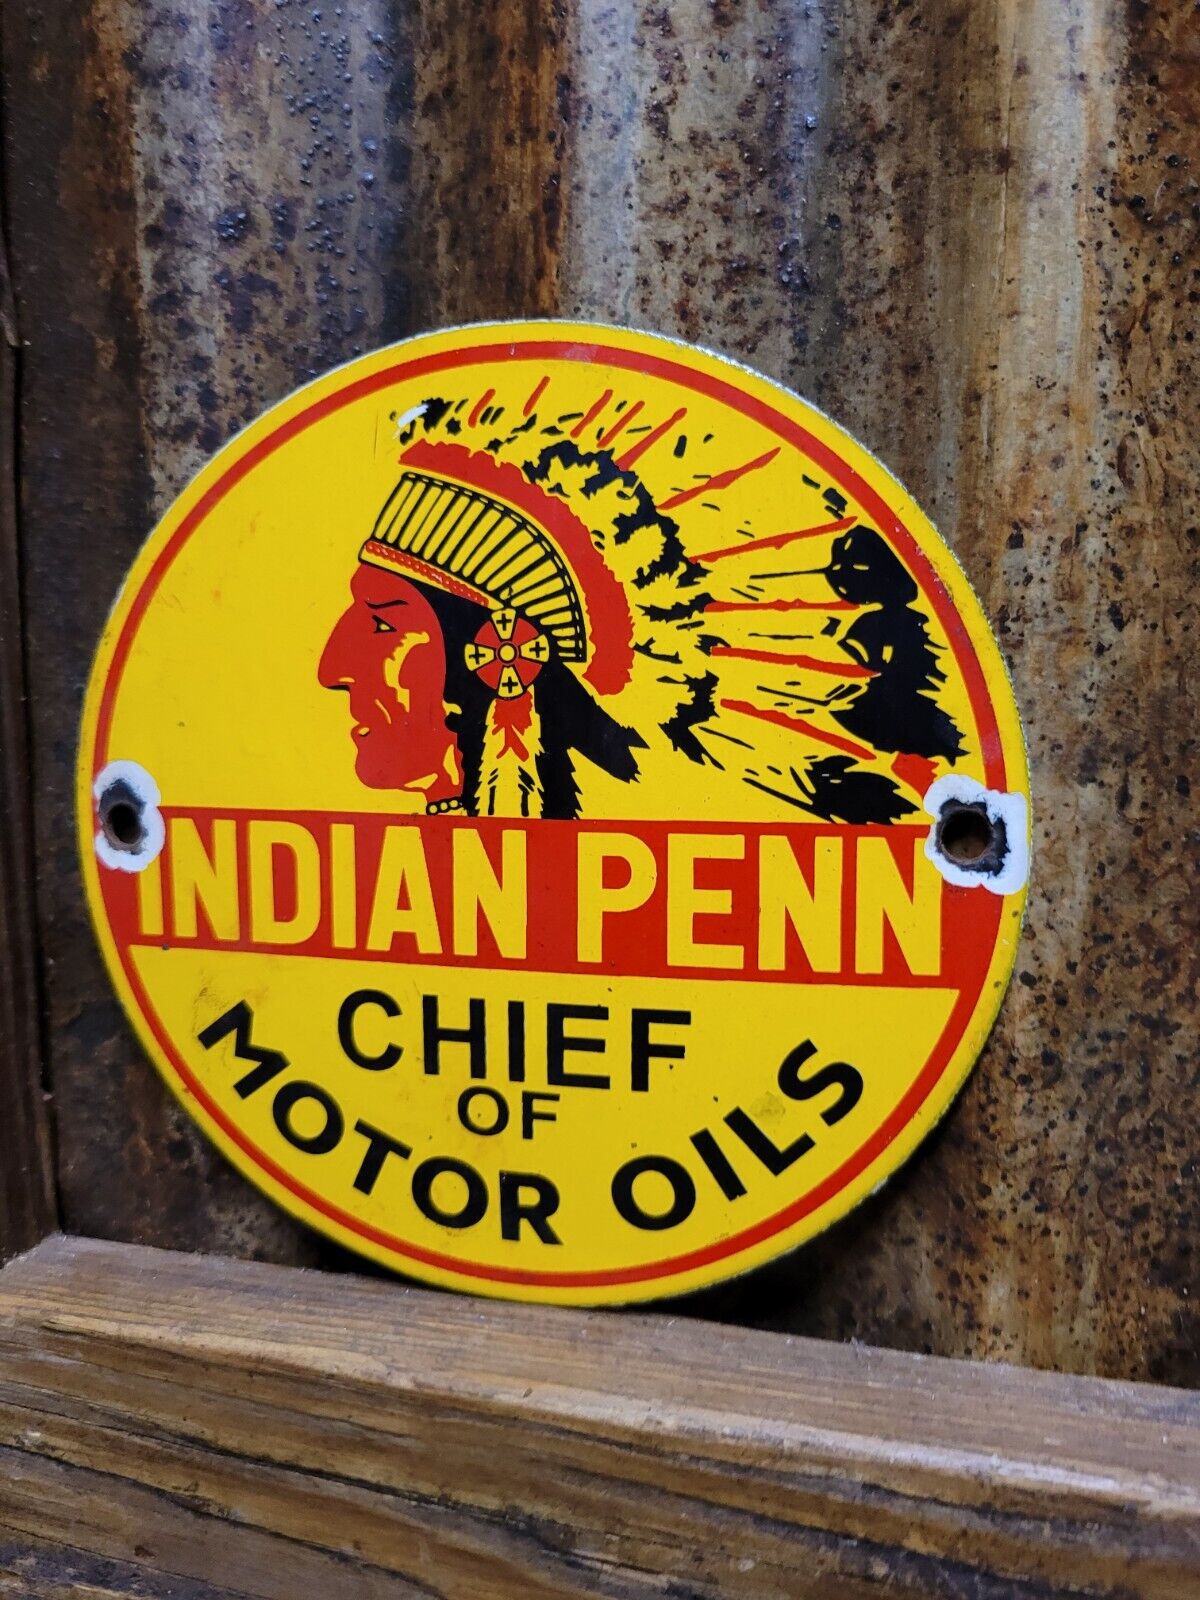 VINTAGE INDIAN PENN PORCELAIN SIGN GAS ADVERTISING CHIEF OF MOTOR OIL PUMP PLATE